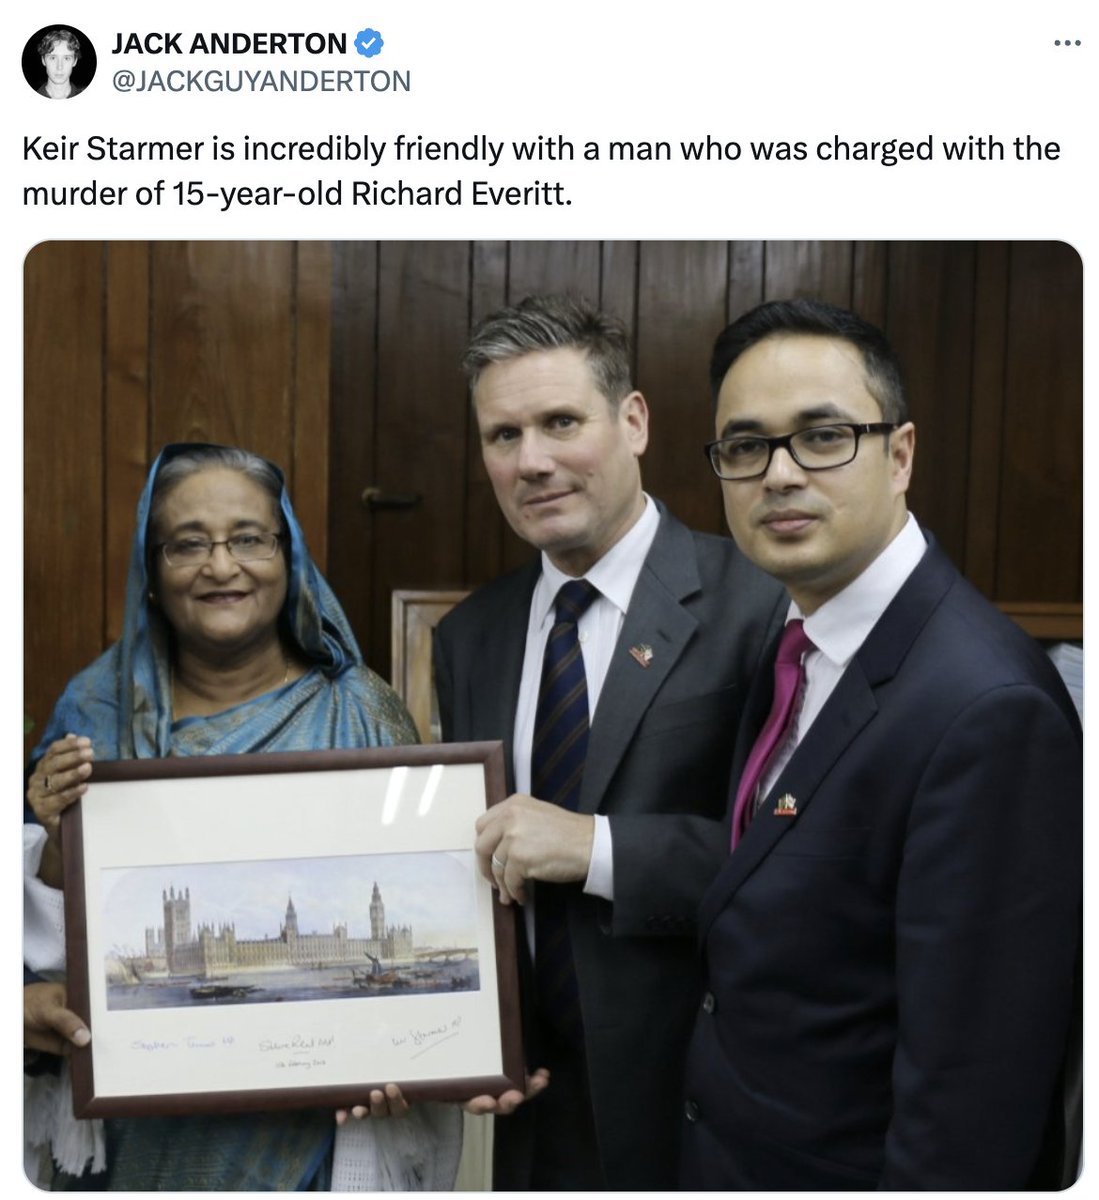 Abdul Hai, a friend of Keir Starmer, who was accused of being involved with a Bangladeshi gang that stabbed 15-year-old Richard Everitt to death in 1994 because he was white, appears to have now been selected as a parliamentary candidate.

Our system is rotten.